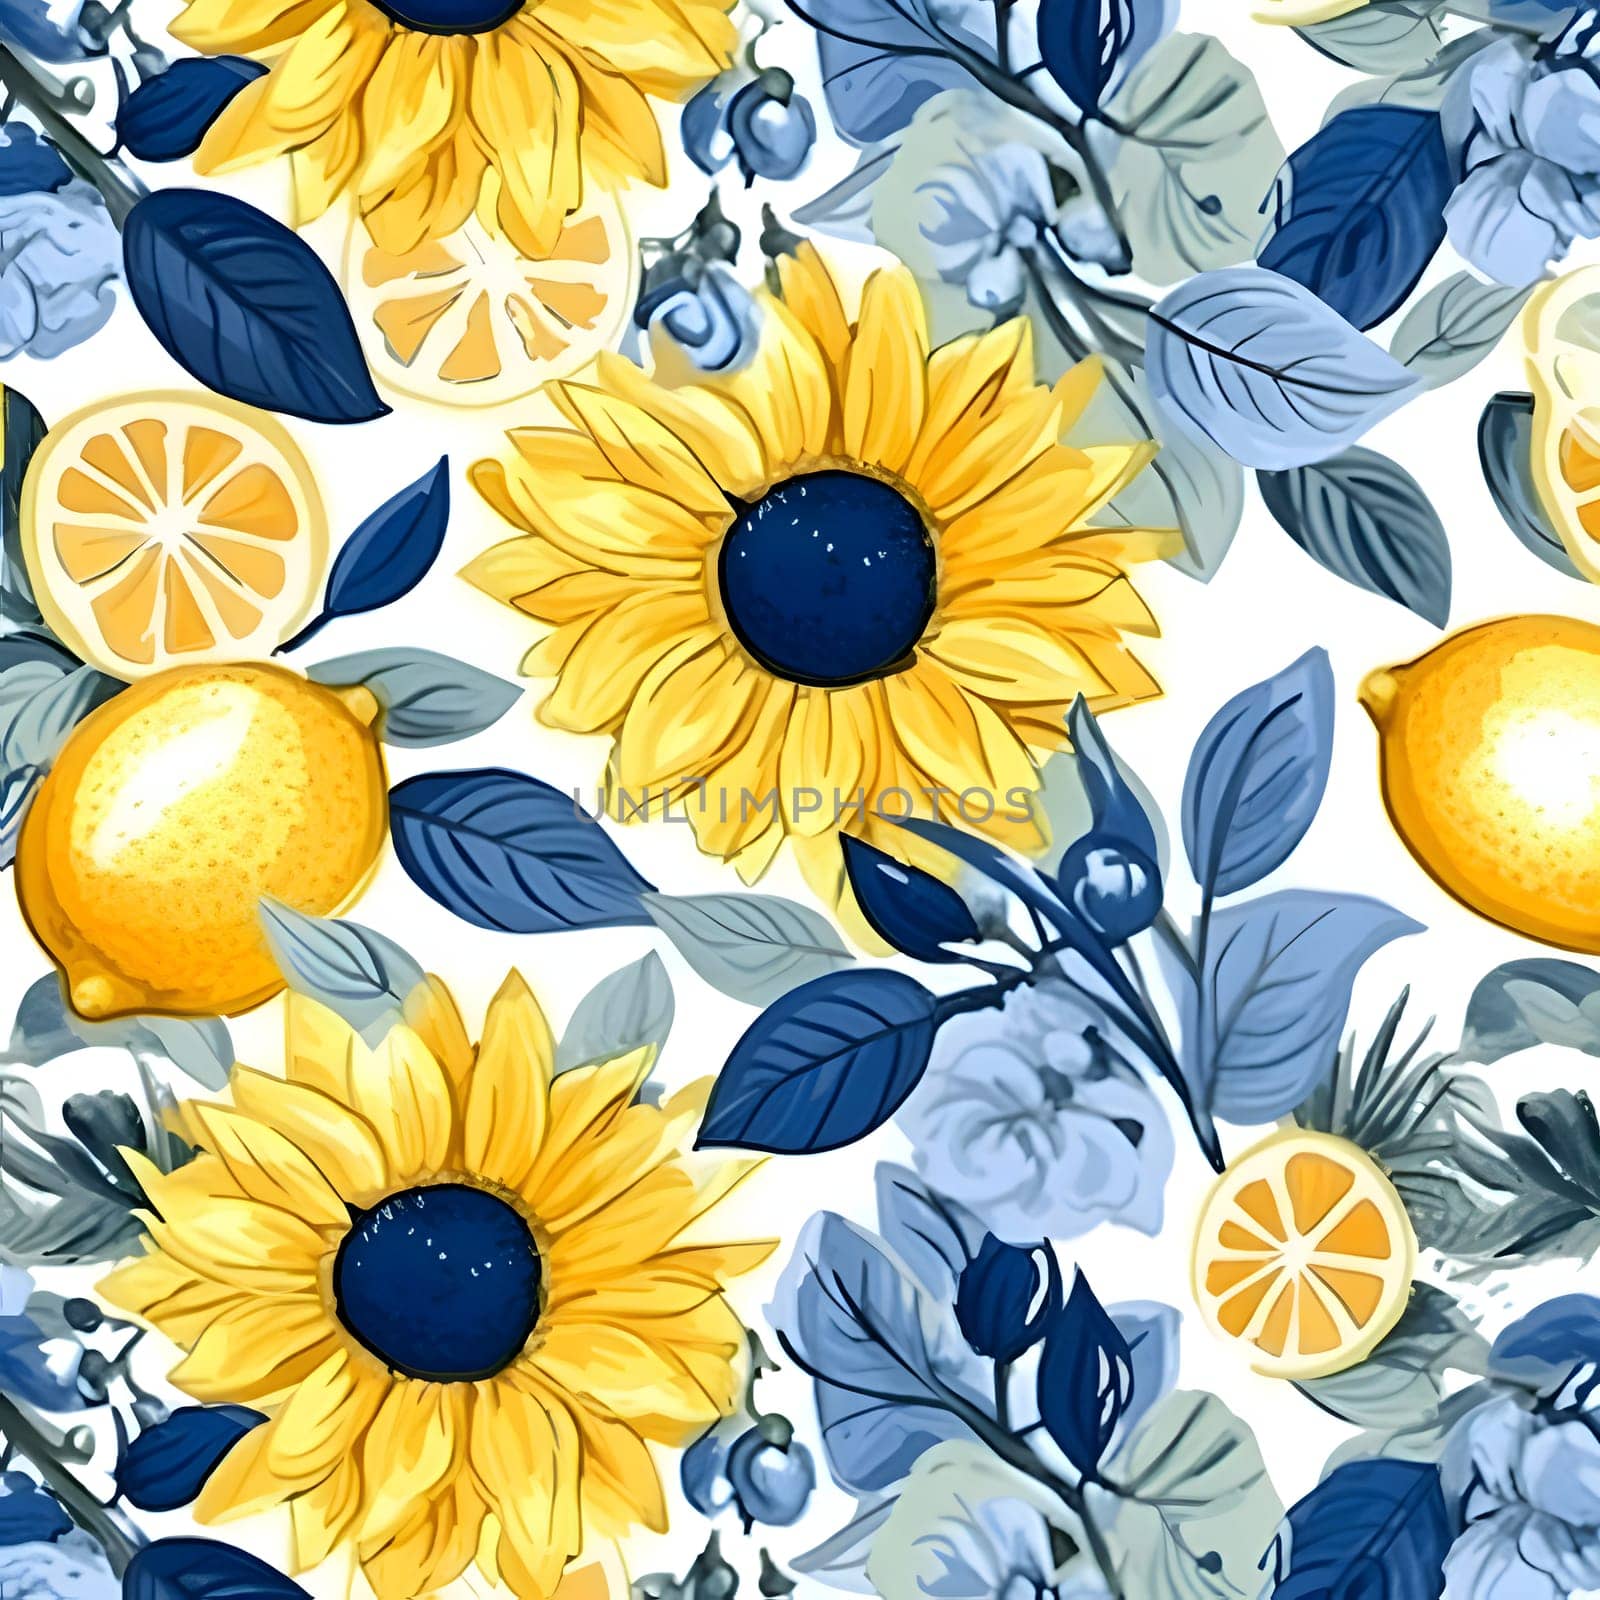 Patterns and banners backgrounds: Seamless pattern with sunflowers and lemons. Vector illustration.